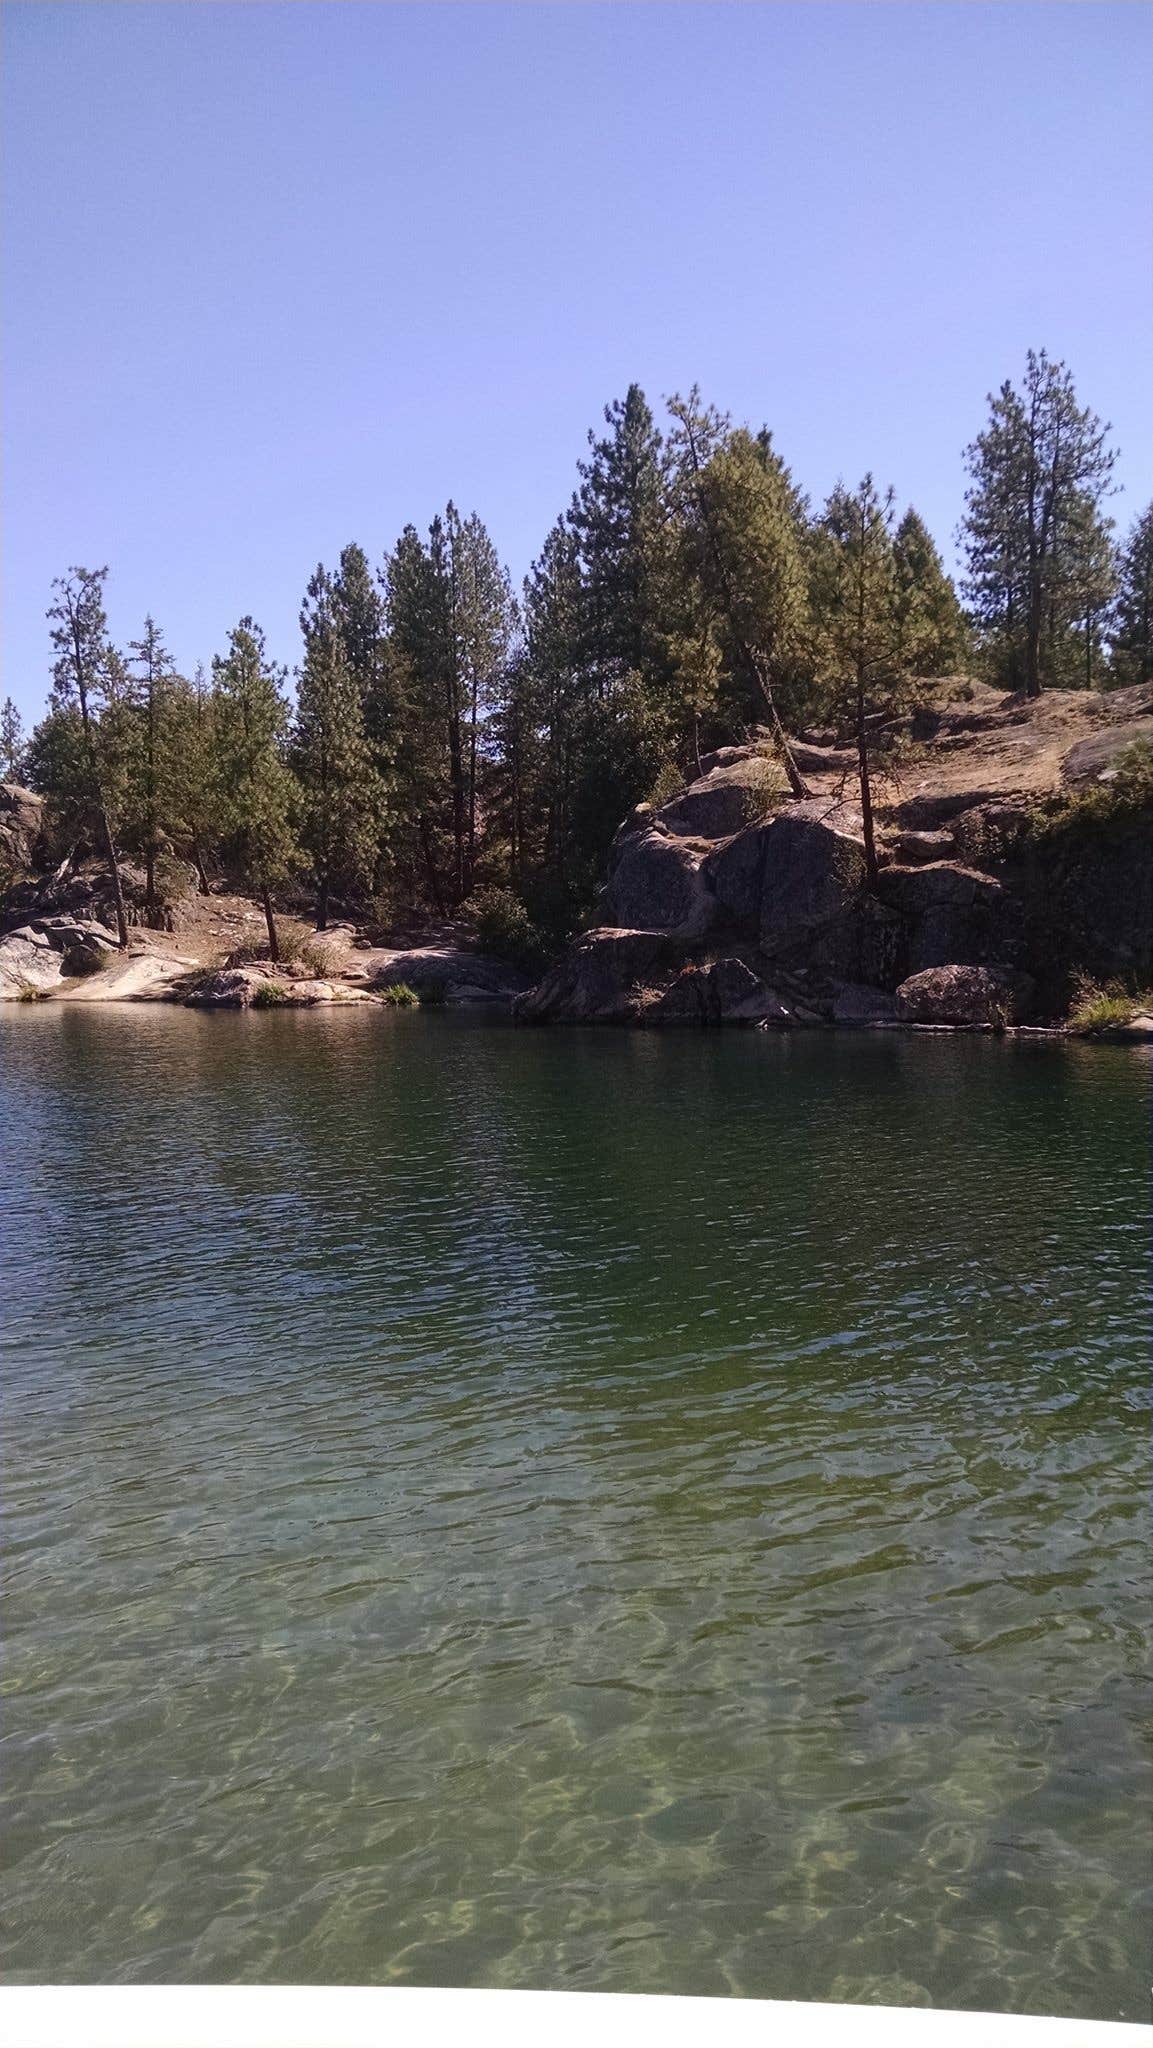 Camper submitted image from Lake Spokane Campground—Riverside State Park - 2